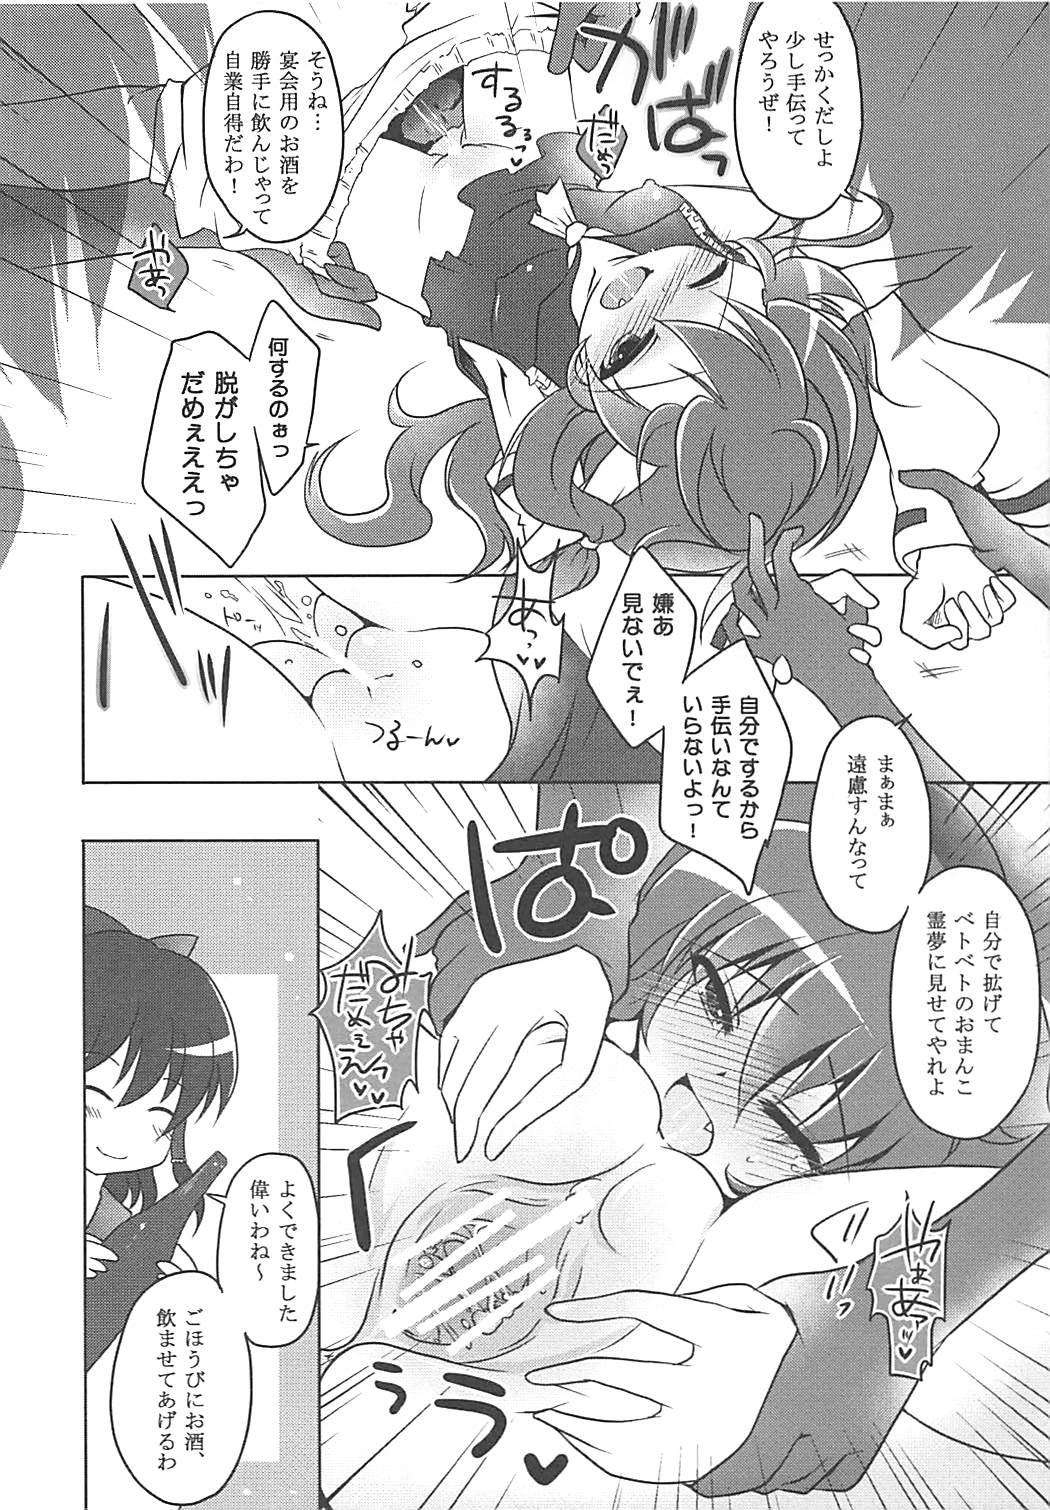 Peeing Suimiko Suika. - Touhou project Nylons - Page 7